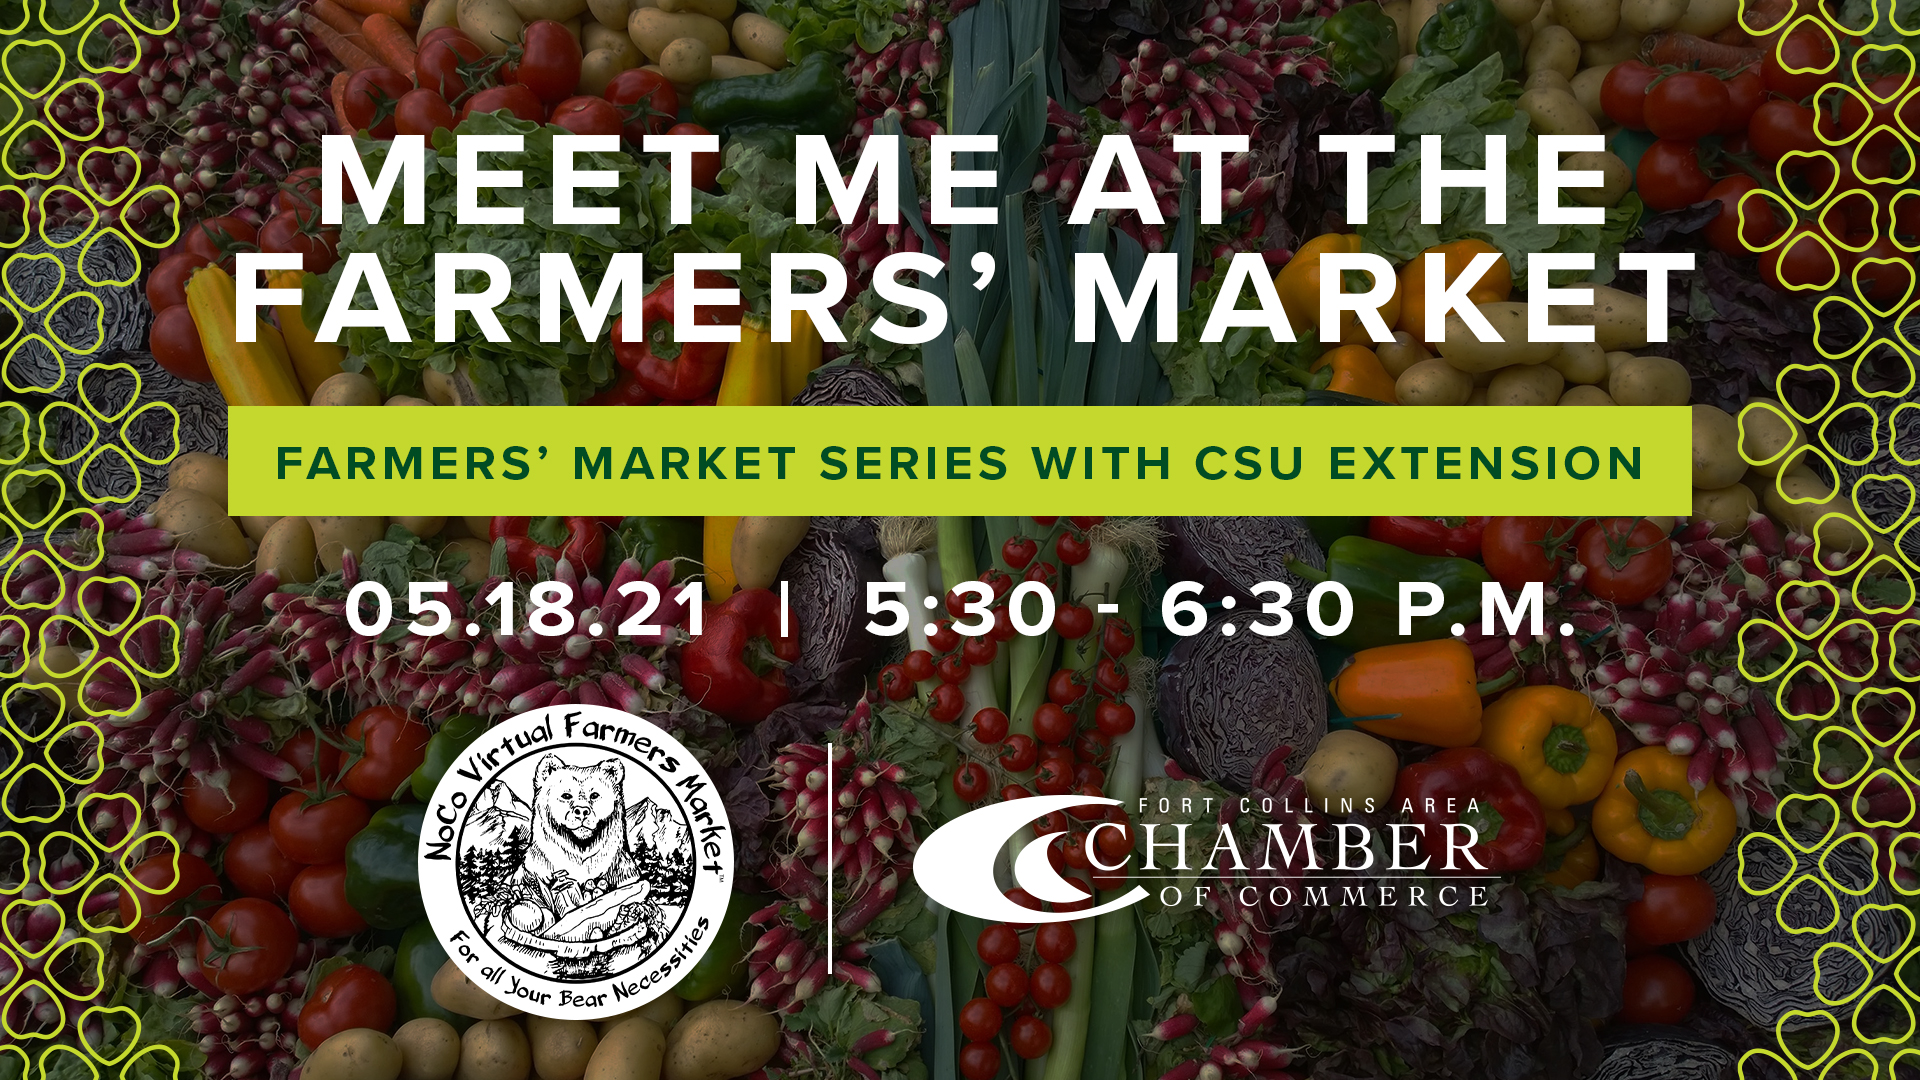 Image for Farmer's Market Series with CSU Extension: Meet Me at The Farmer's Market webinar